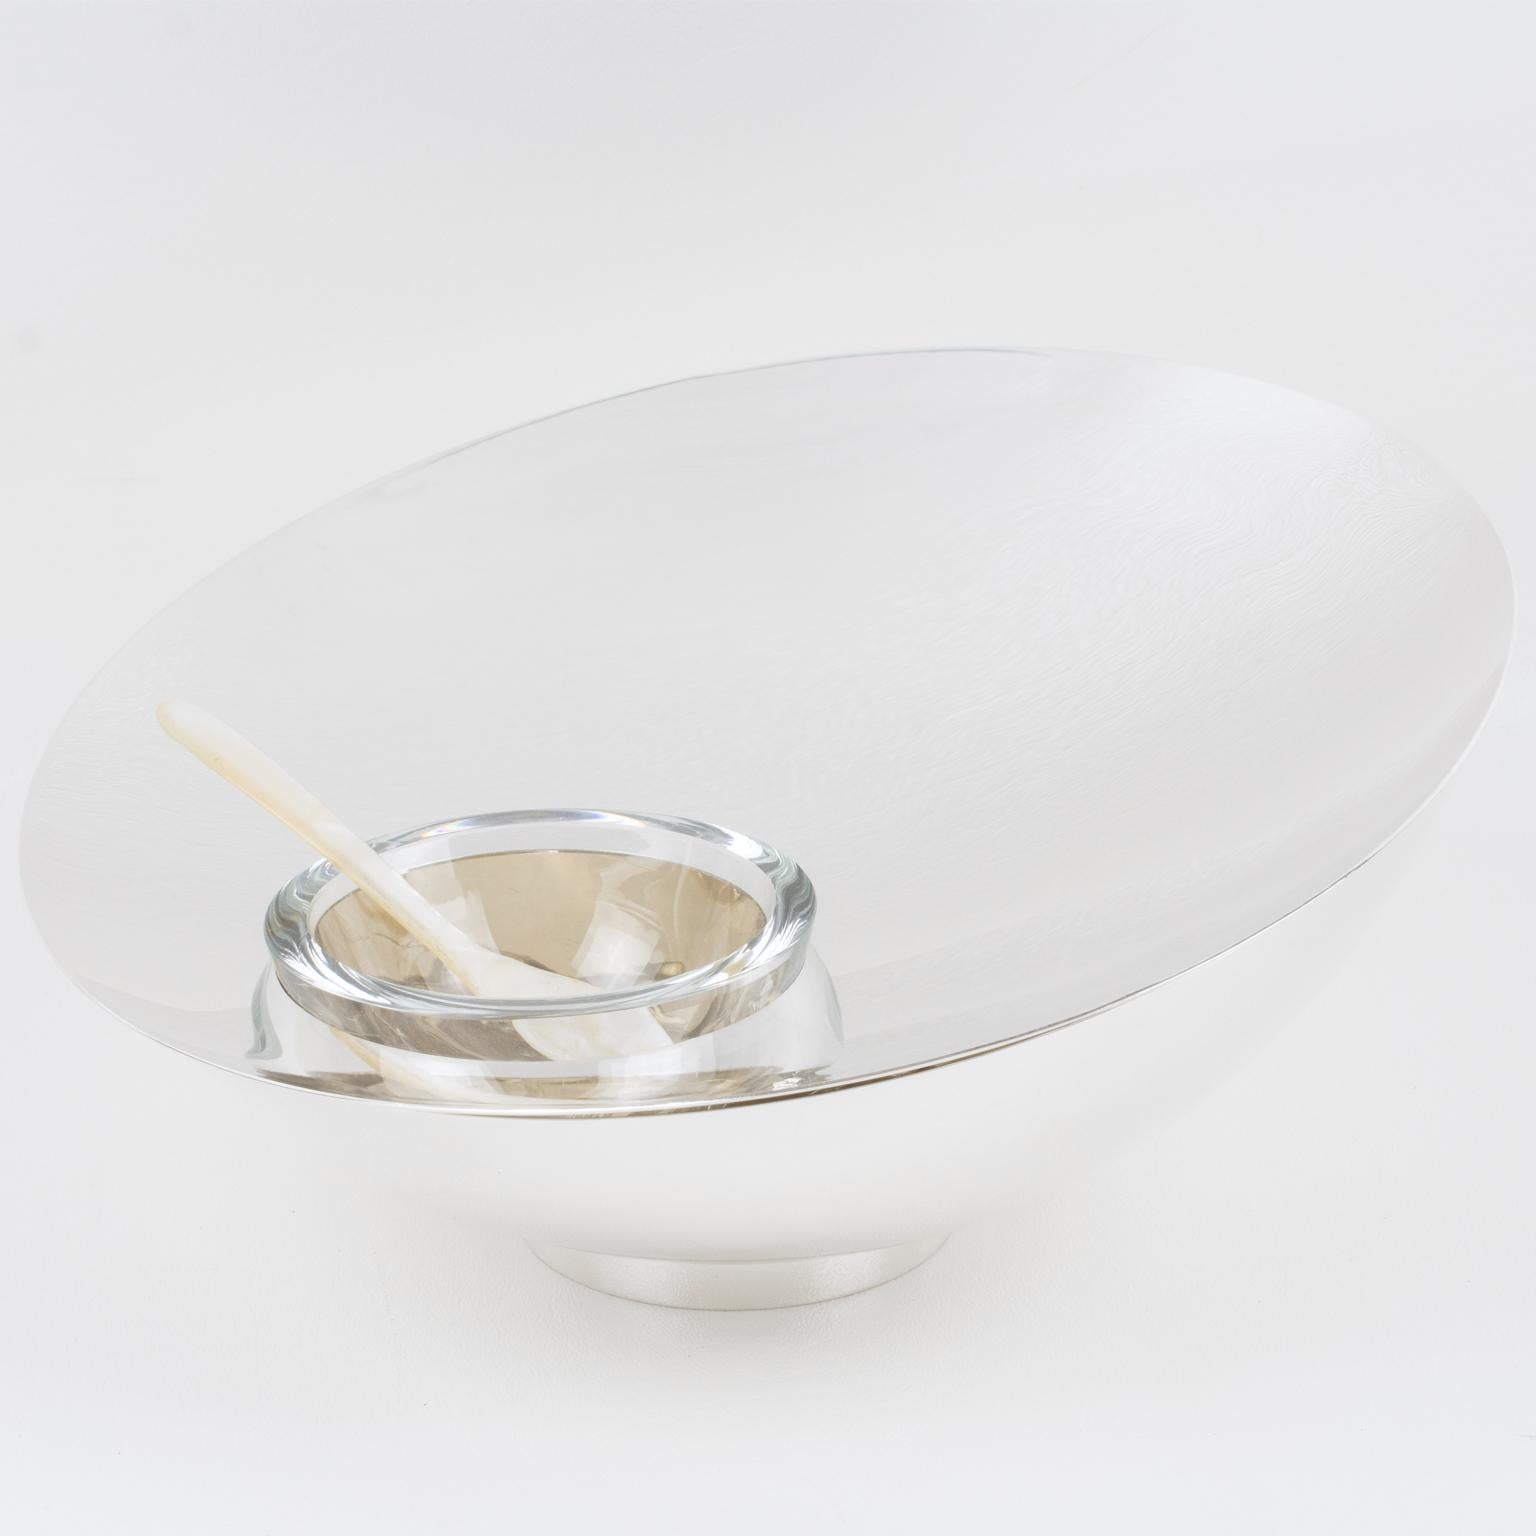 Stylish modernist three-piece set including one bowl, a tray insert, and a crystal bowl insert with a mother-of-pearl spoon, designed circa 1980, by Nan Swid for SwidPowell and known as the 